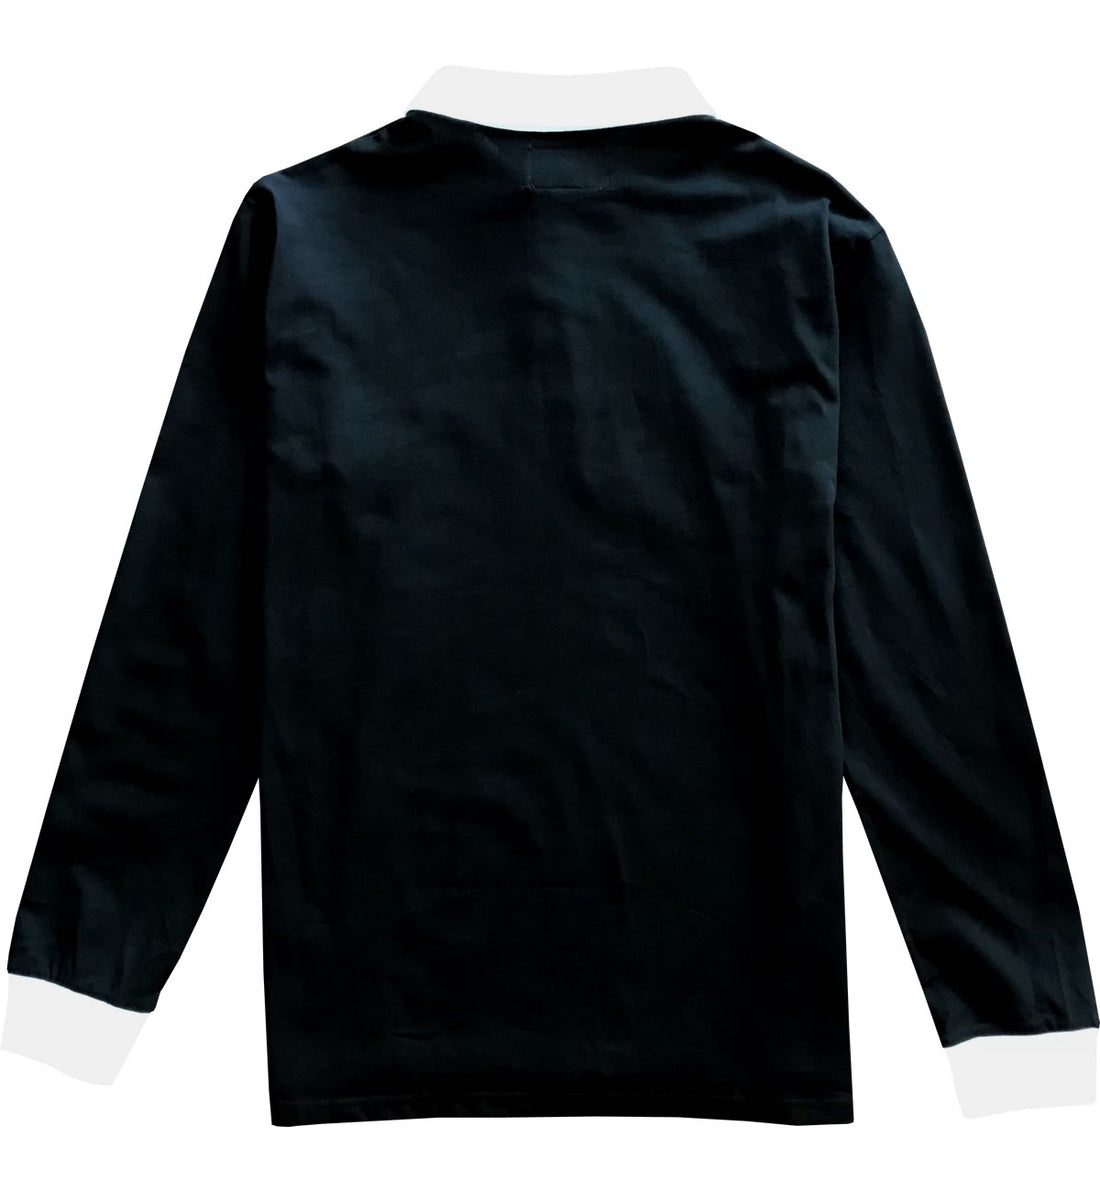 Solid Black with White Collar Mens Long Sleeve Polo Rugby Shirt